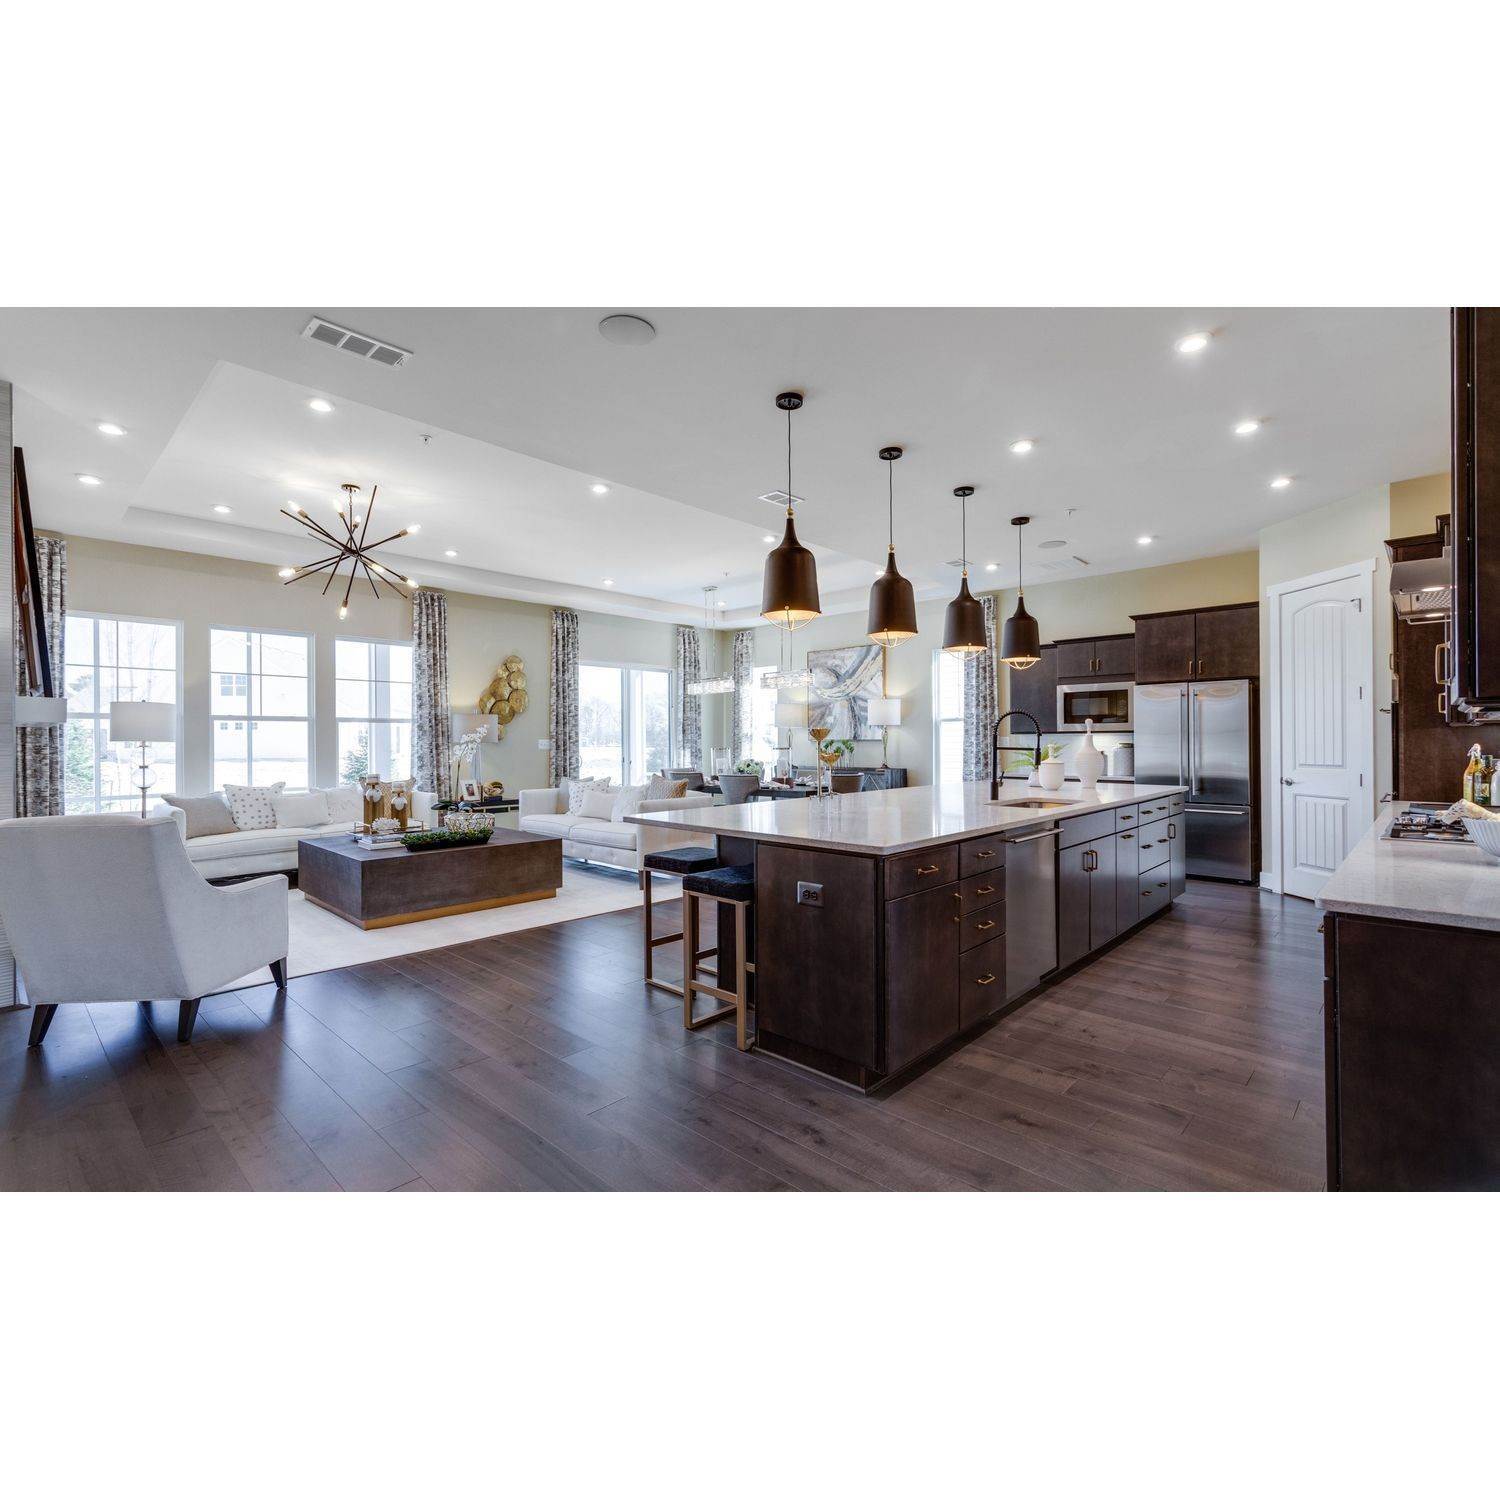 16. Single Family for Sale at K. Hovnanian's® Four Seasons At Kent Island - Sing 203 Bayberry Drive, Chester, MD 21619